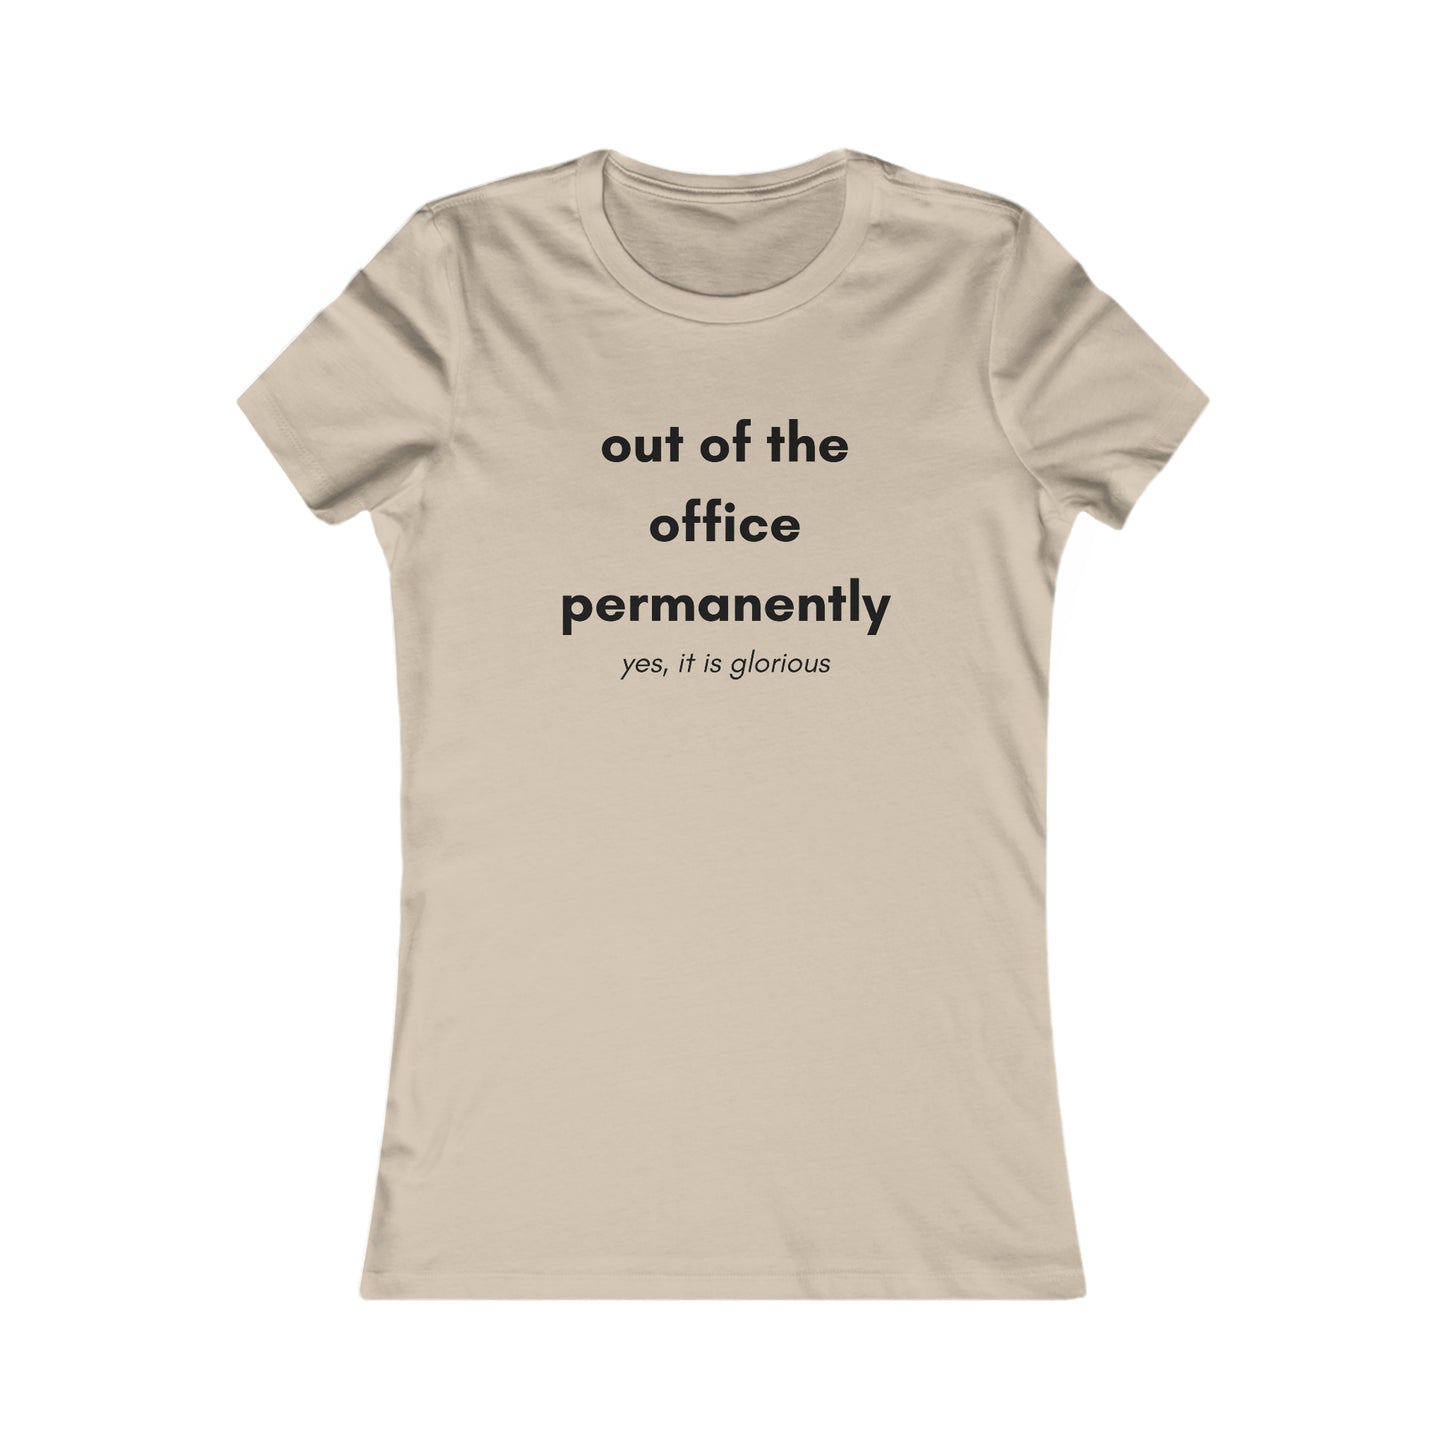 "Out of the office permanently yes it is glorious” Women's Favorite Tee designed for lucky person in several colors for you to choose from. Slim fit so please check the size table.